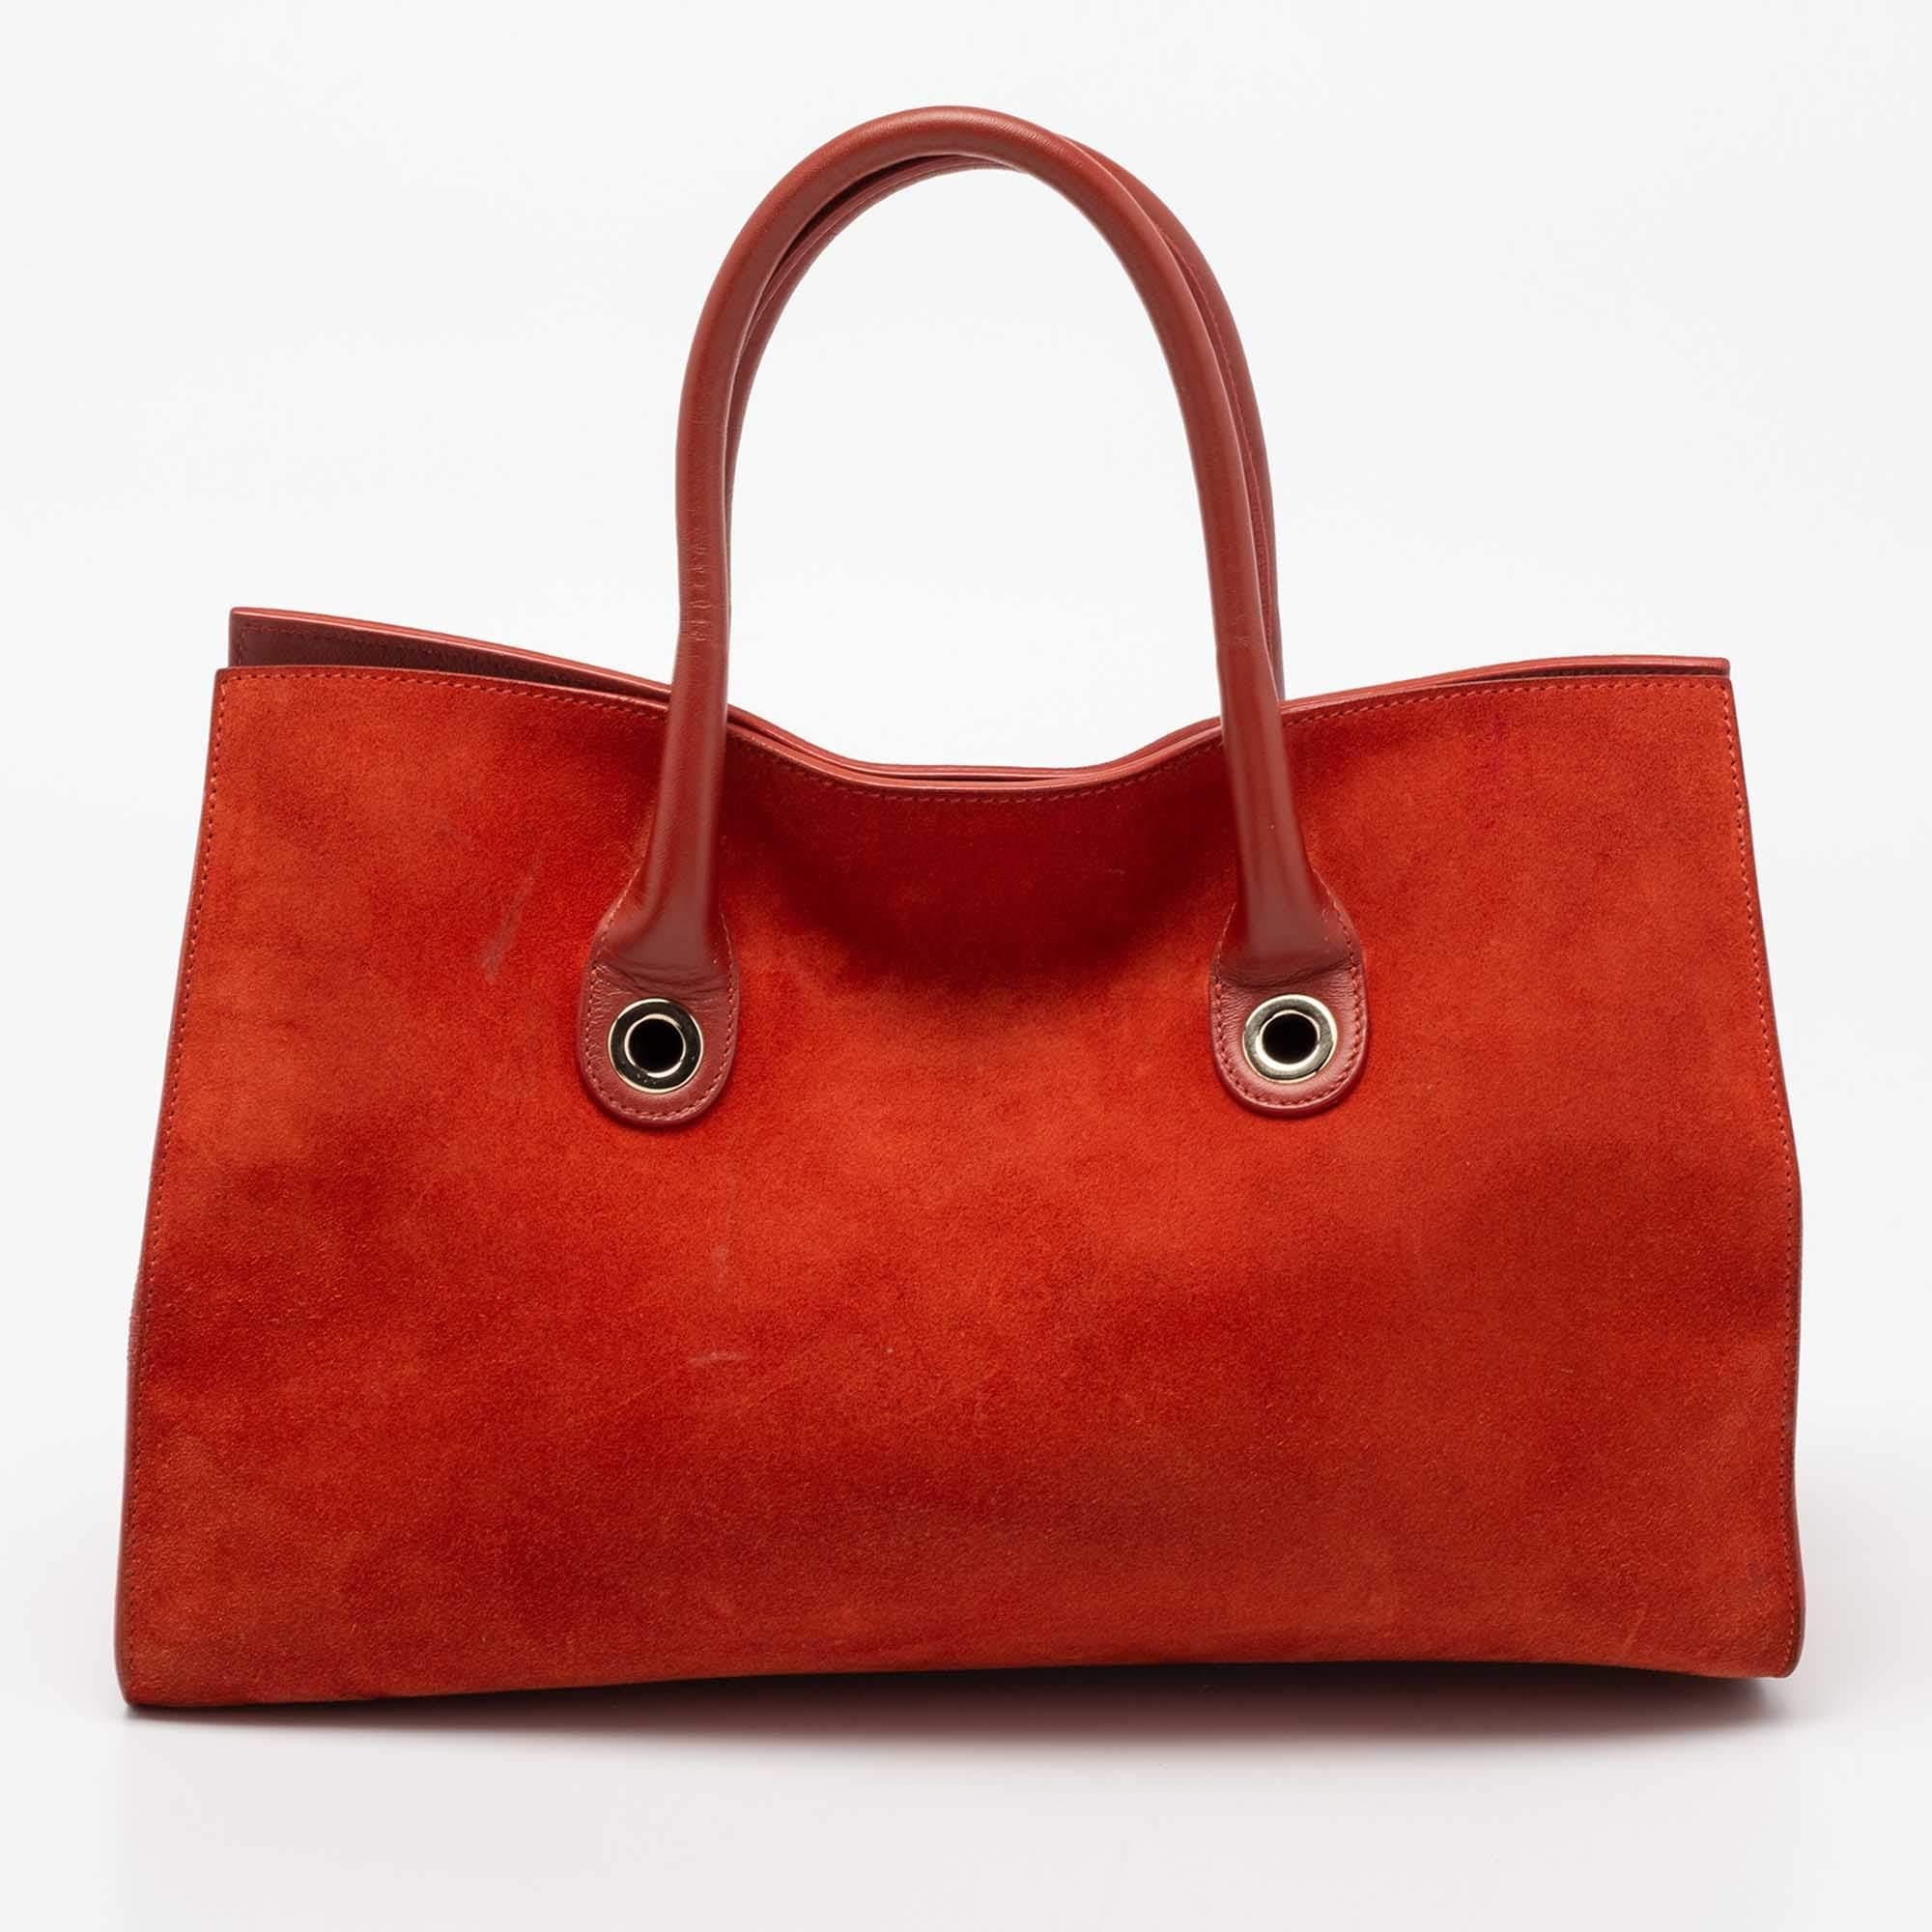 Coming from Jimmy Choo is this pretty orange tote that is the perfect day bag. It is crafted from suede and leather into a structured shape. The bag flaunts gold-tone details, dual handles, and a capacious interior for your belongings. It will look